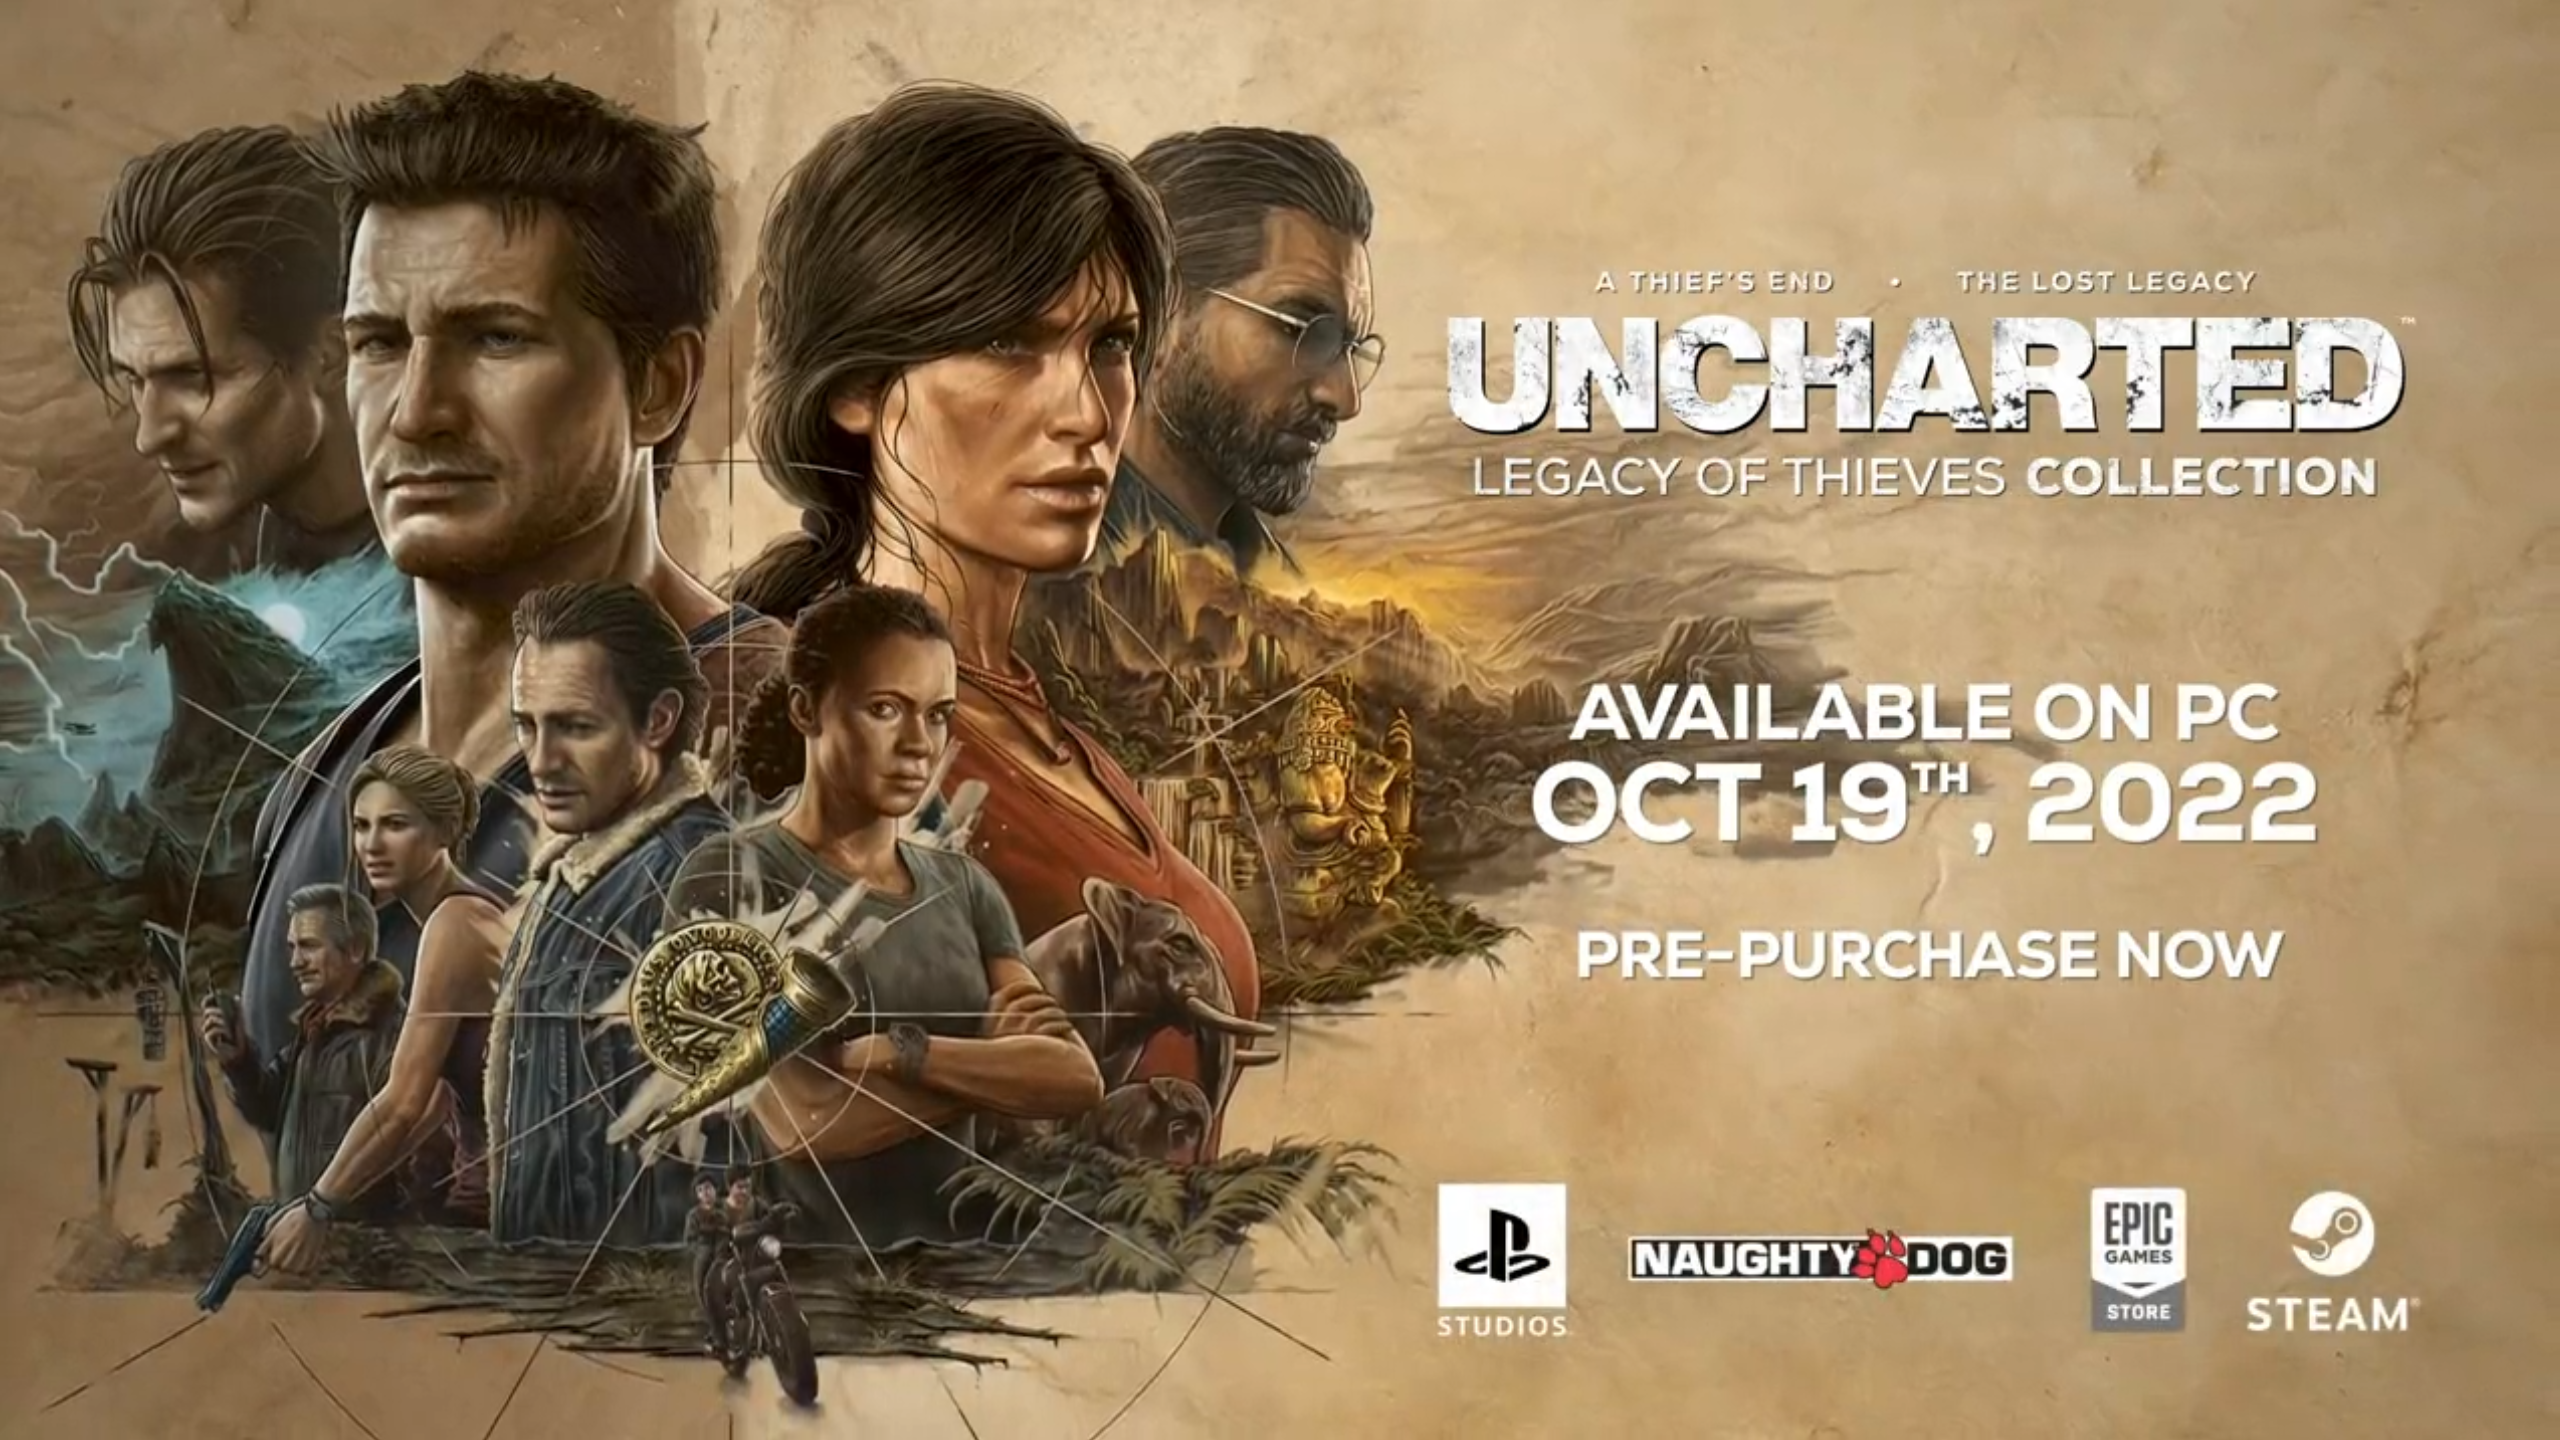 Uncharted Legacy of Thieves PC release date listed on Epic Games